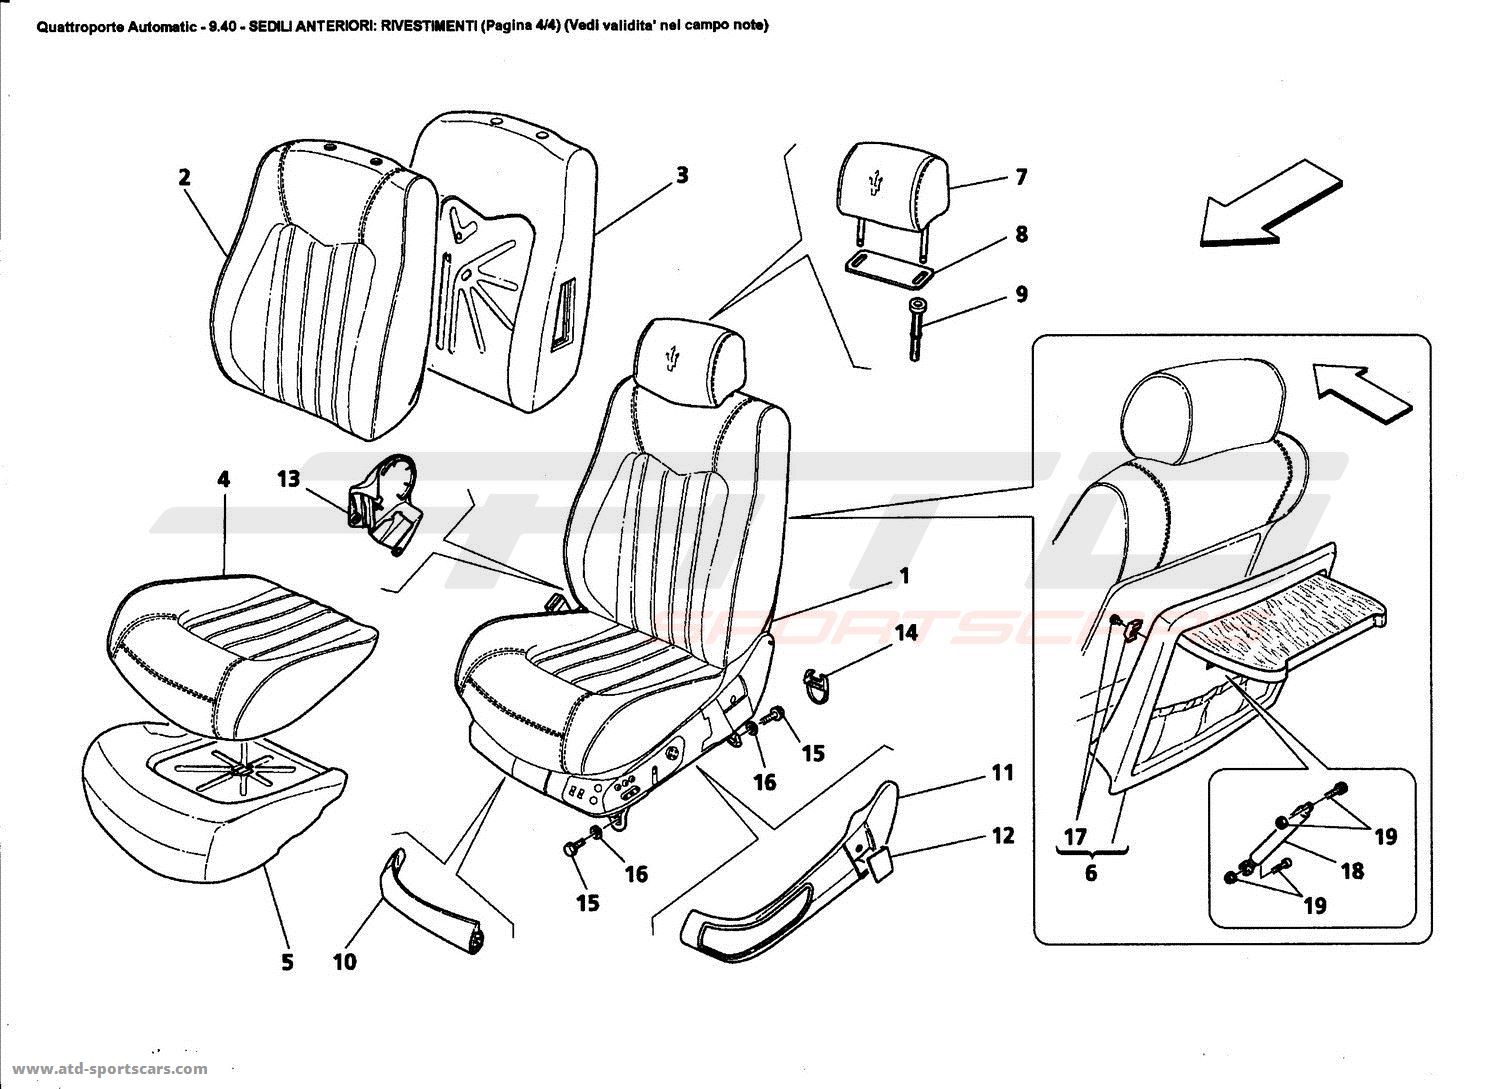 FRONT SEATS: LININGS (Page 4/4) (See validity on note field)